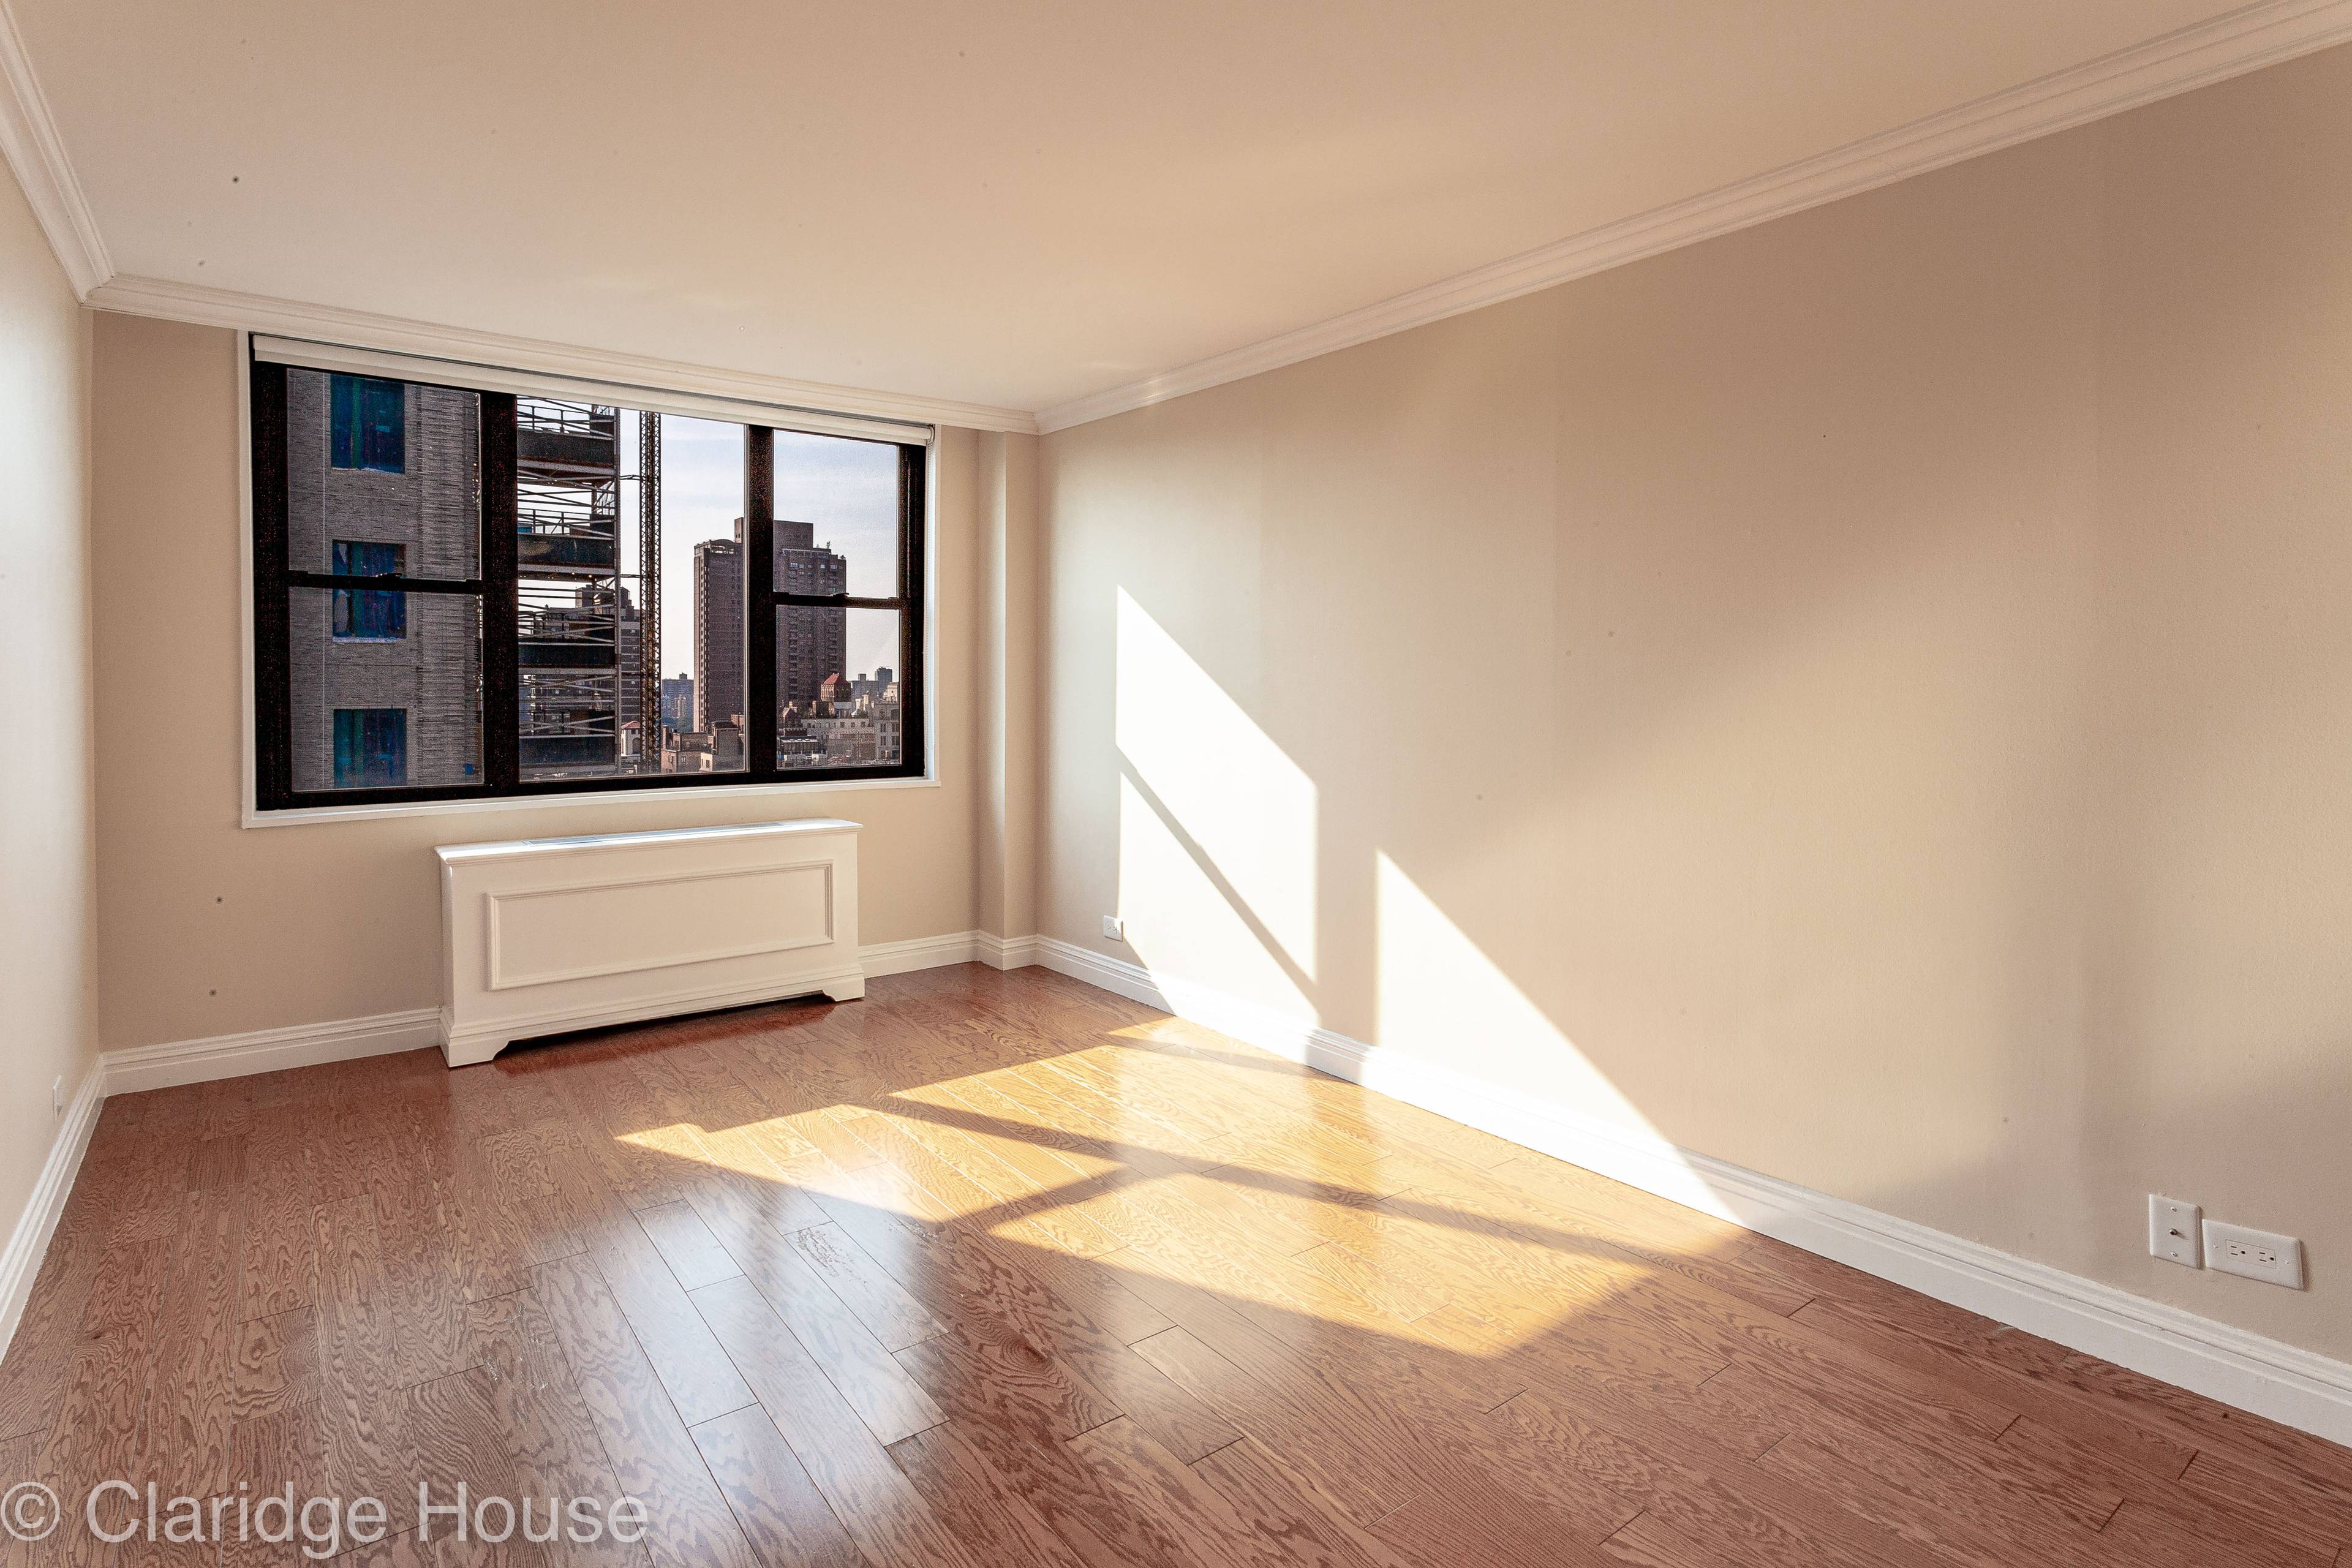 Bright and Spacious 1 bed/ 1 bath, No Fee Luxury Apartment in the Upper East Side with High End Finishes